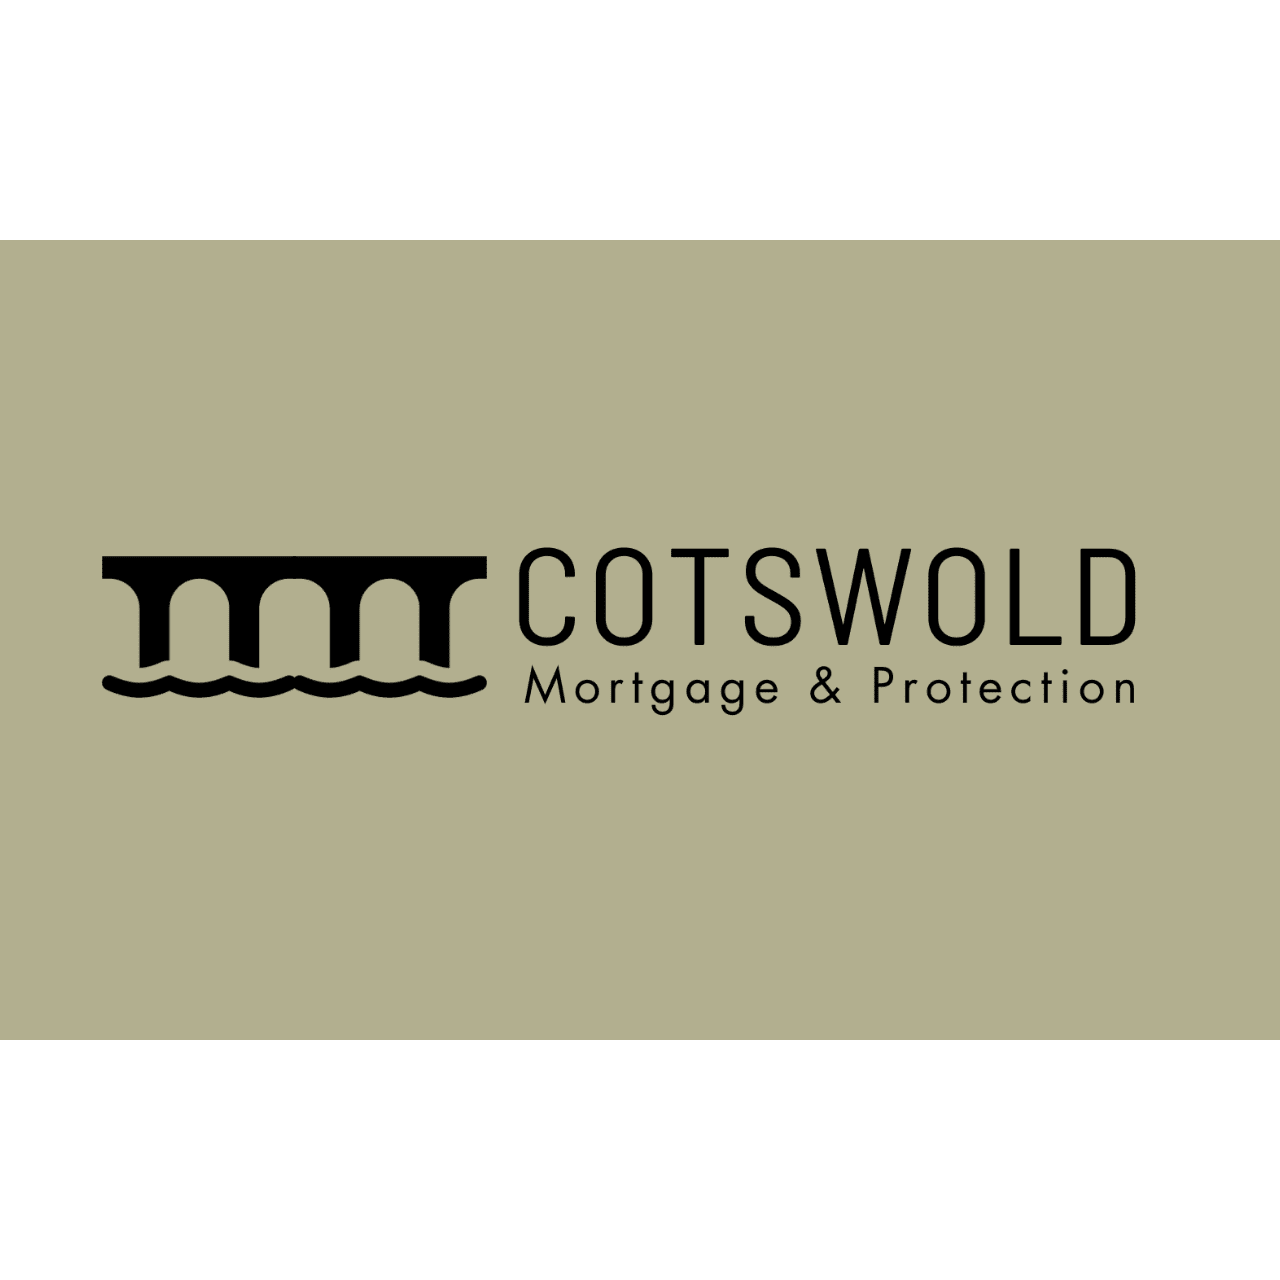 Cotswold Mortgage and Protection - Banbury, Oxfordshire OX16 9PF - 01865 570315 | ShowMeLocal.com